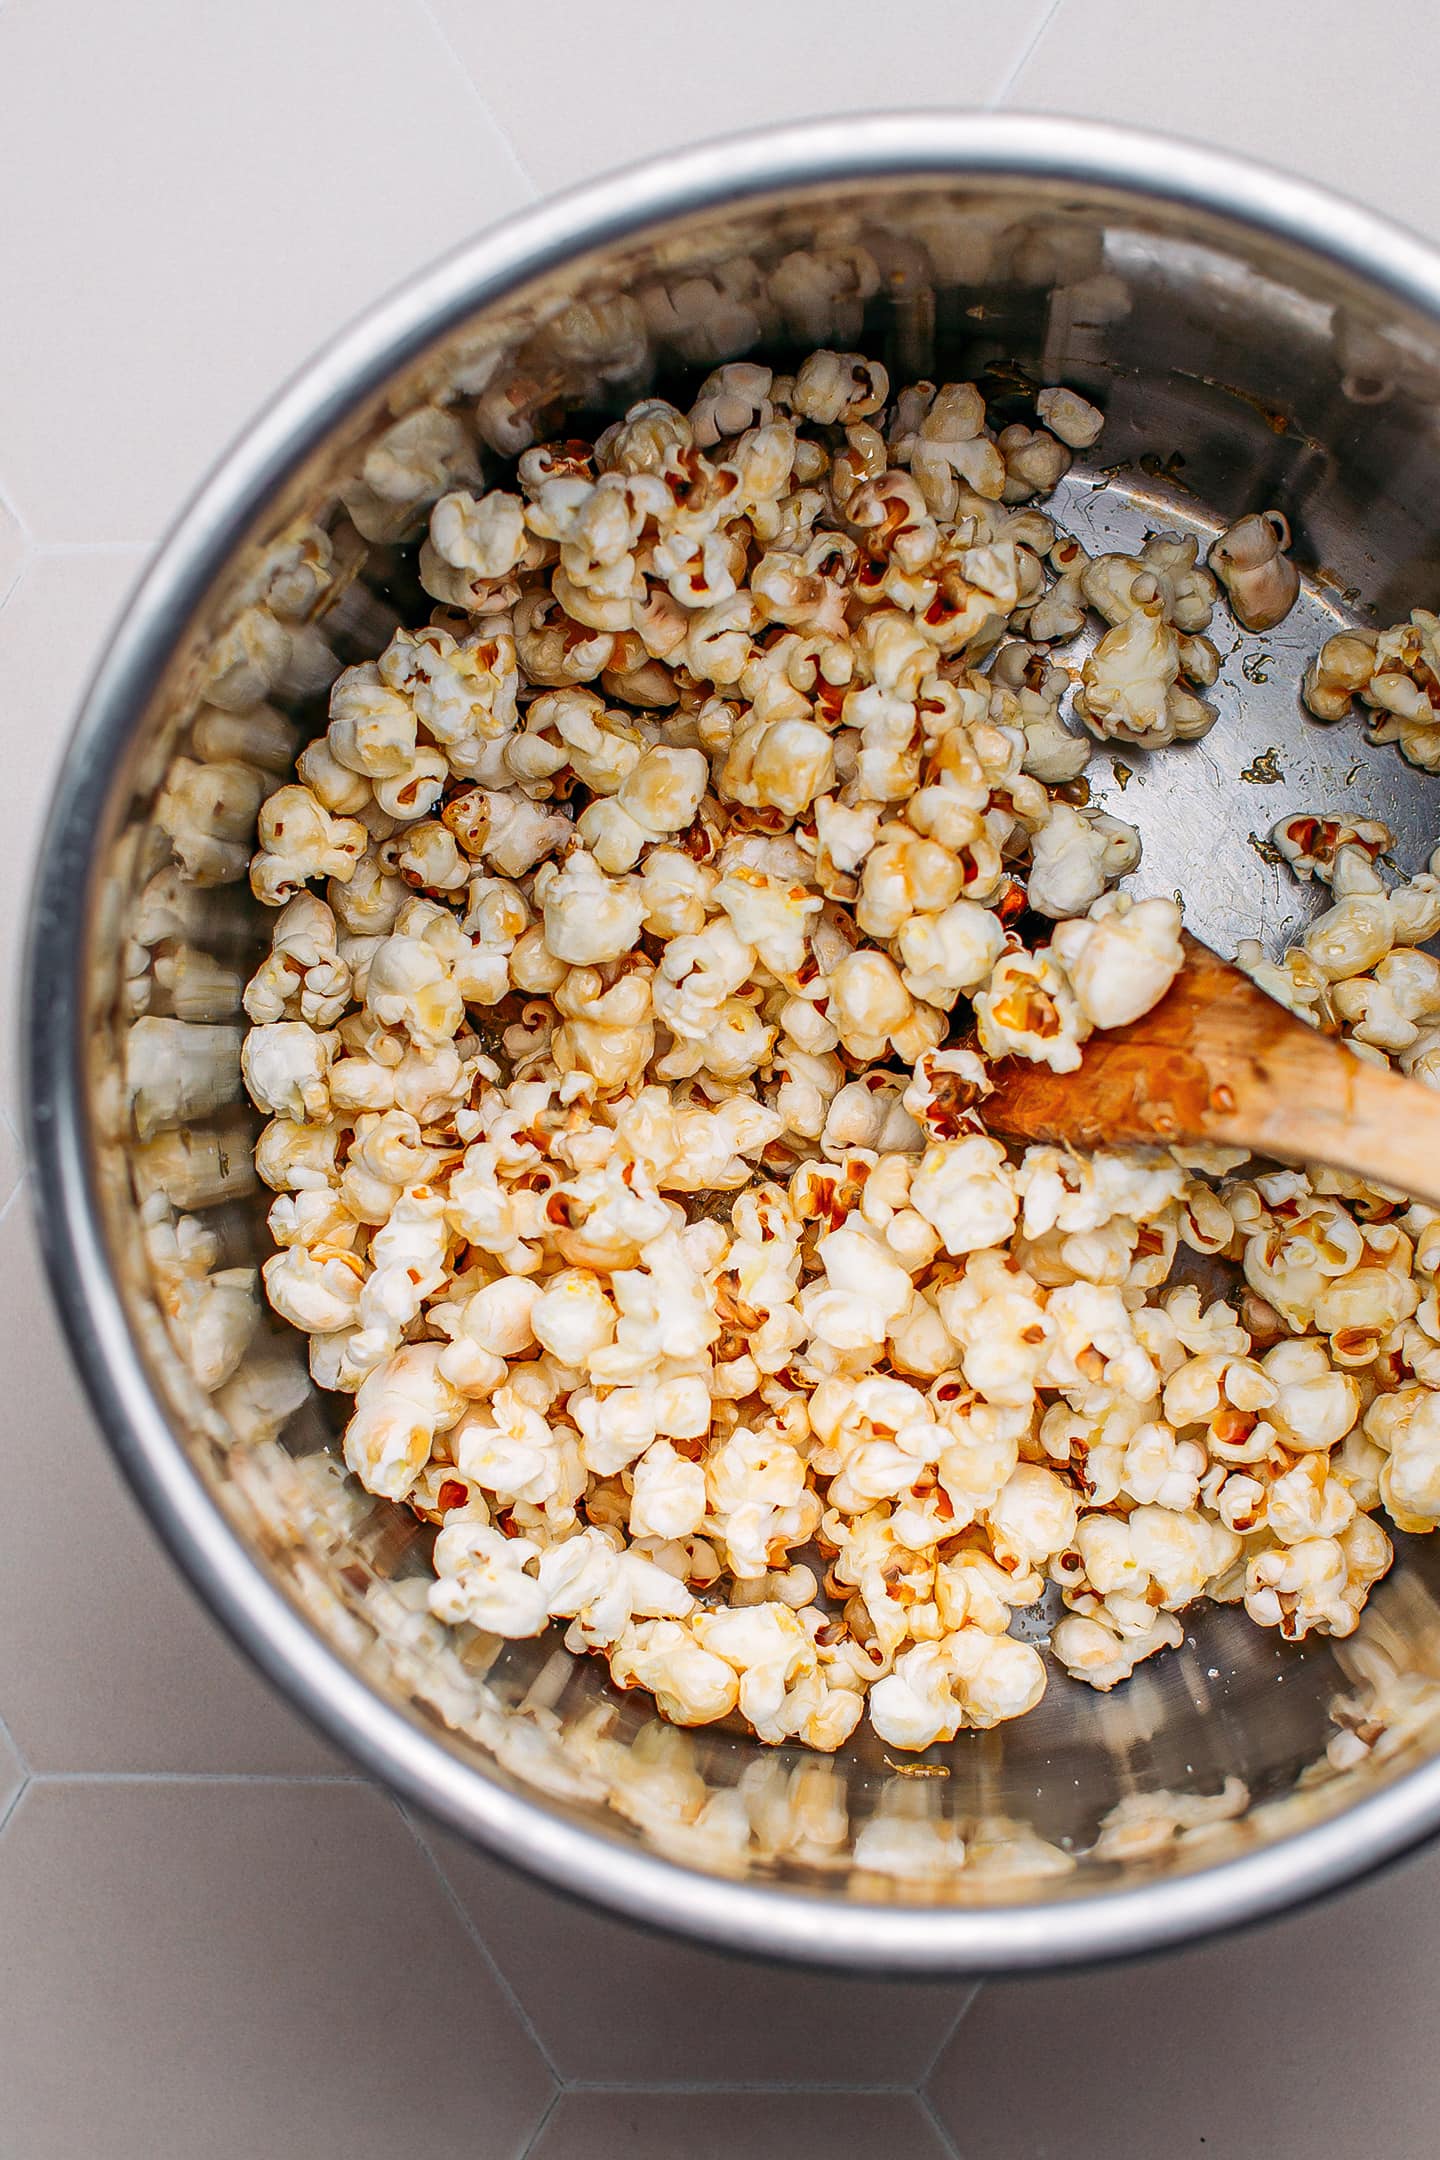 Popcorn coated with maple syrup in a pot.